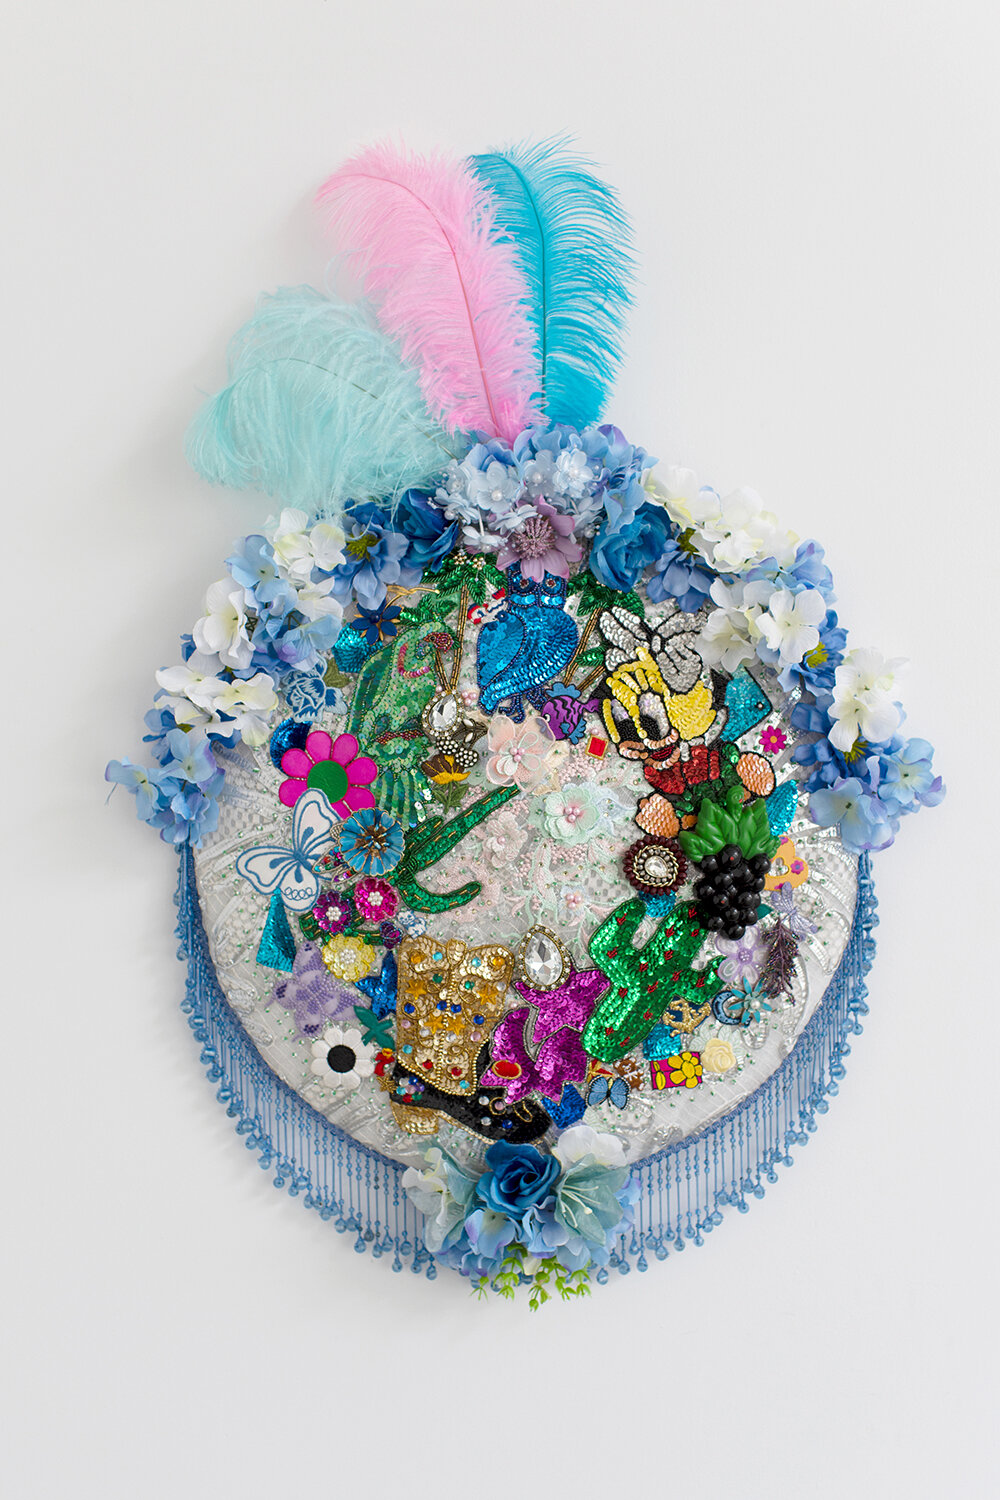   Elegy #5 , 2019, Crystal and plastic beads, sequin patches, found fabric, trim, fabric flowers, magnets, ostrich feathers, polyester batting, composite board, thread, 38 x 25 x 5” 